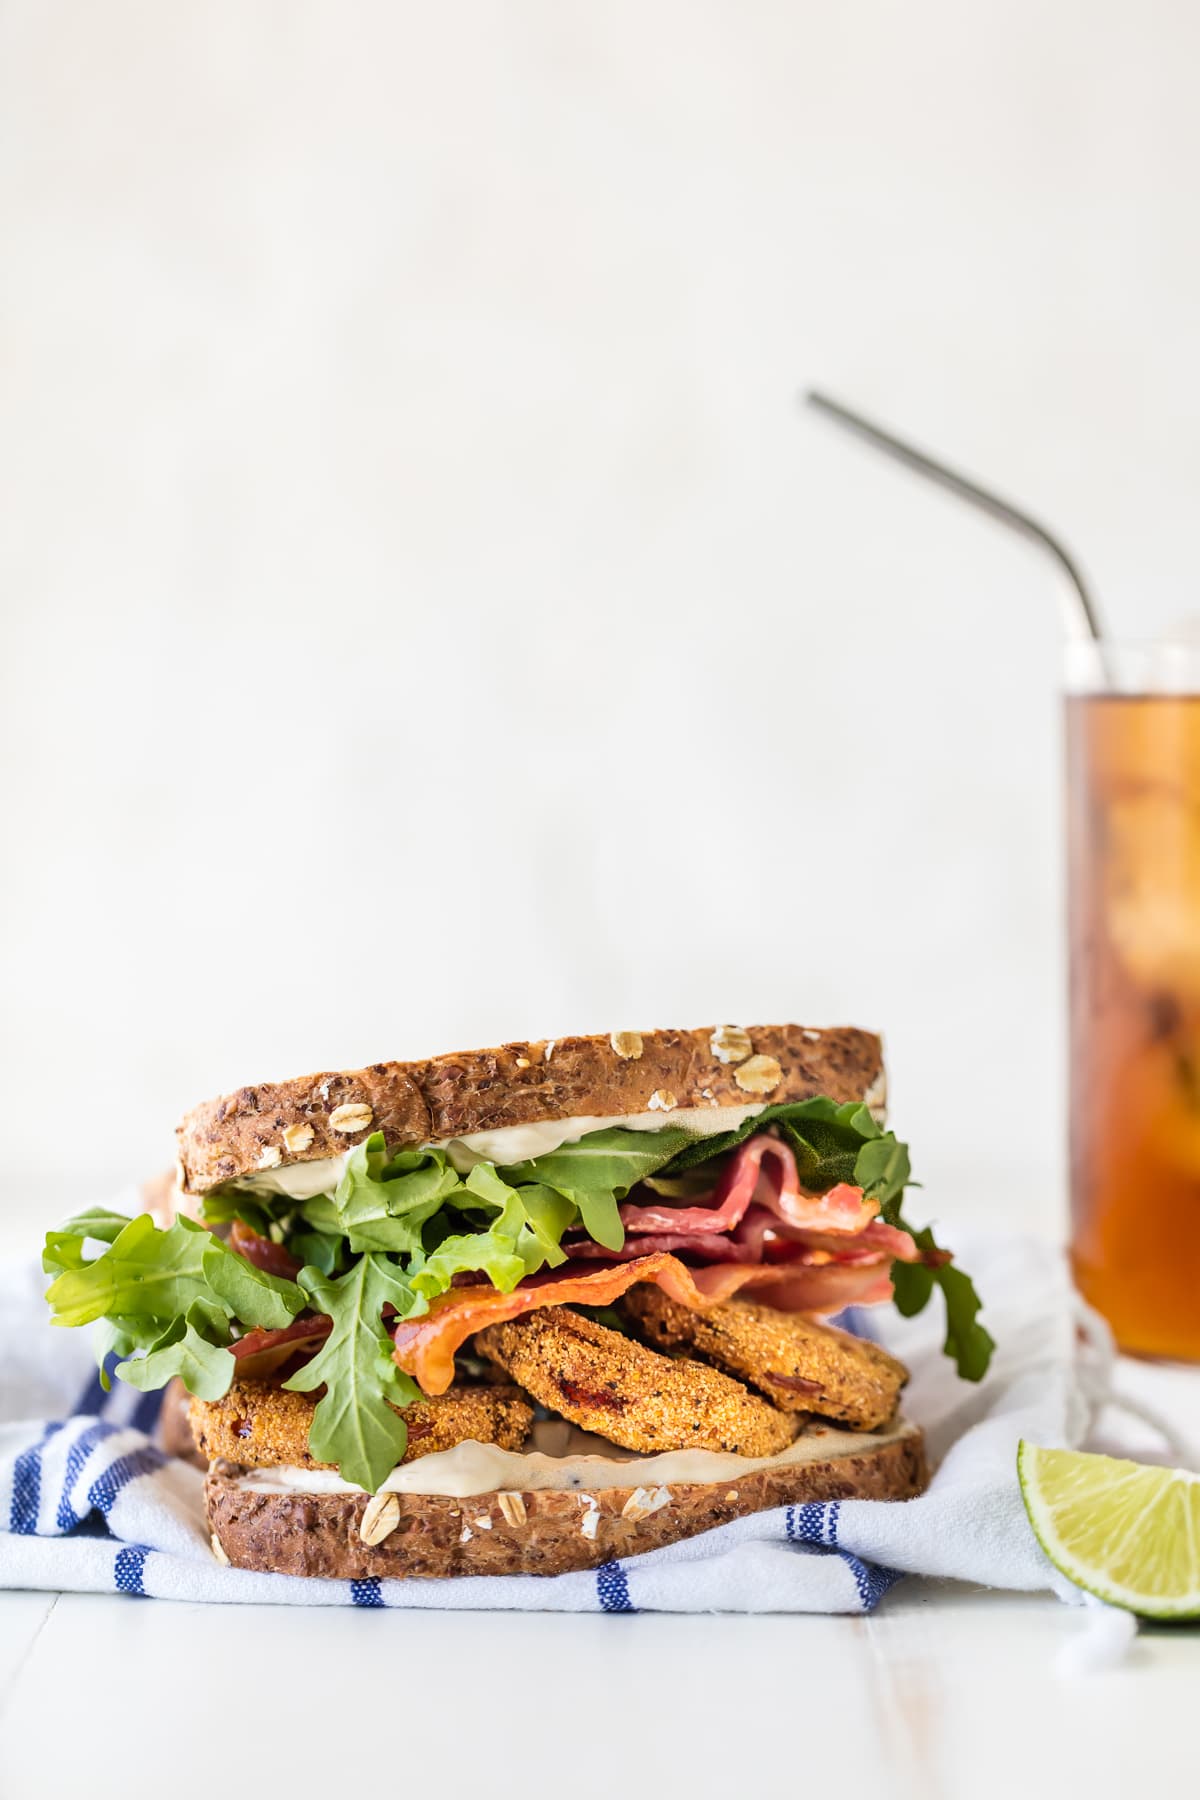 BLT recipe with fried tomatoes, arugula, and cilantro lime mayo